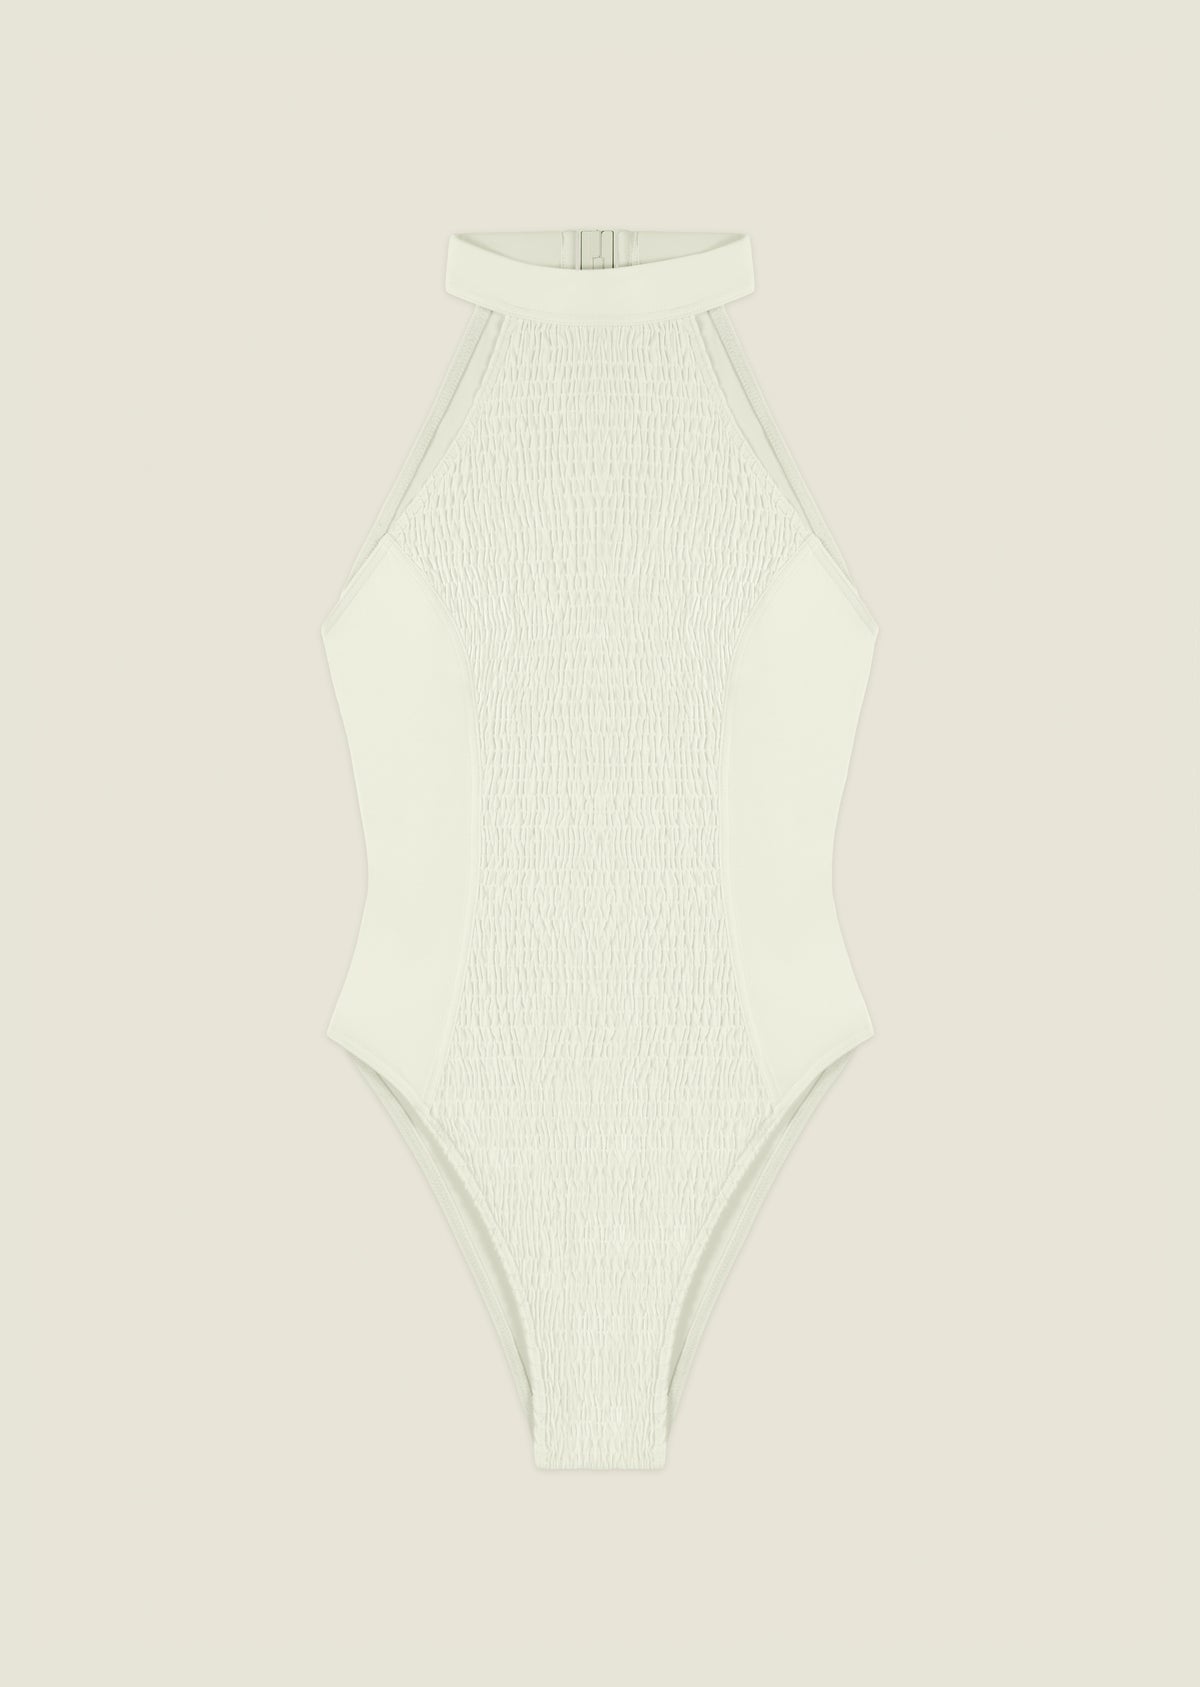 Dolphin - Ivory / white - One-piece swimsuit - white